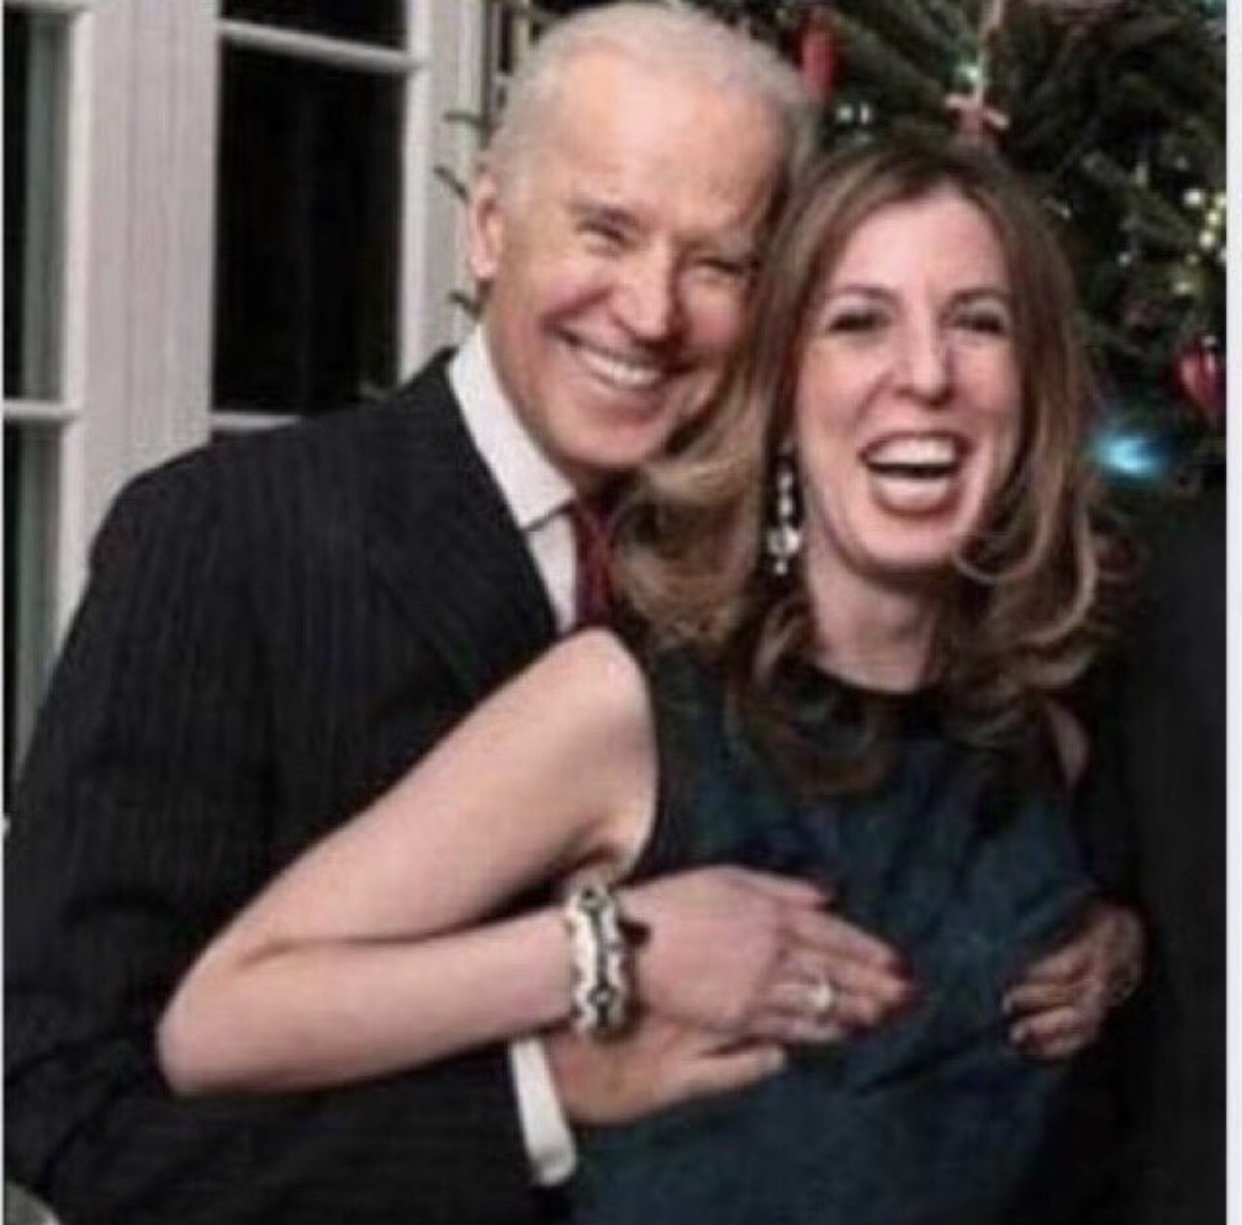 America This is the Projected Criminal Elect Biden